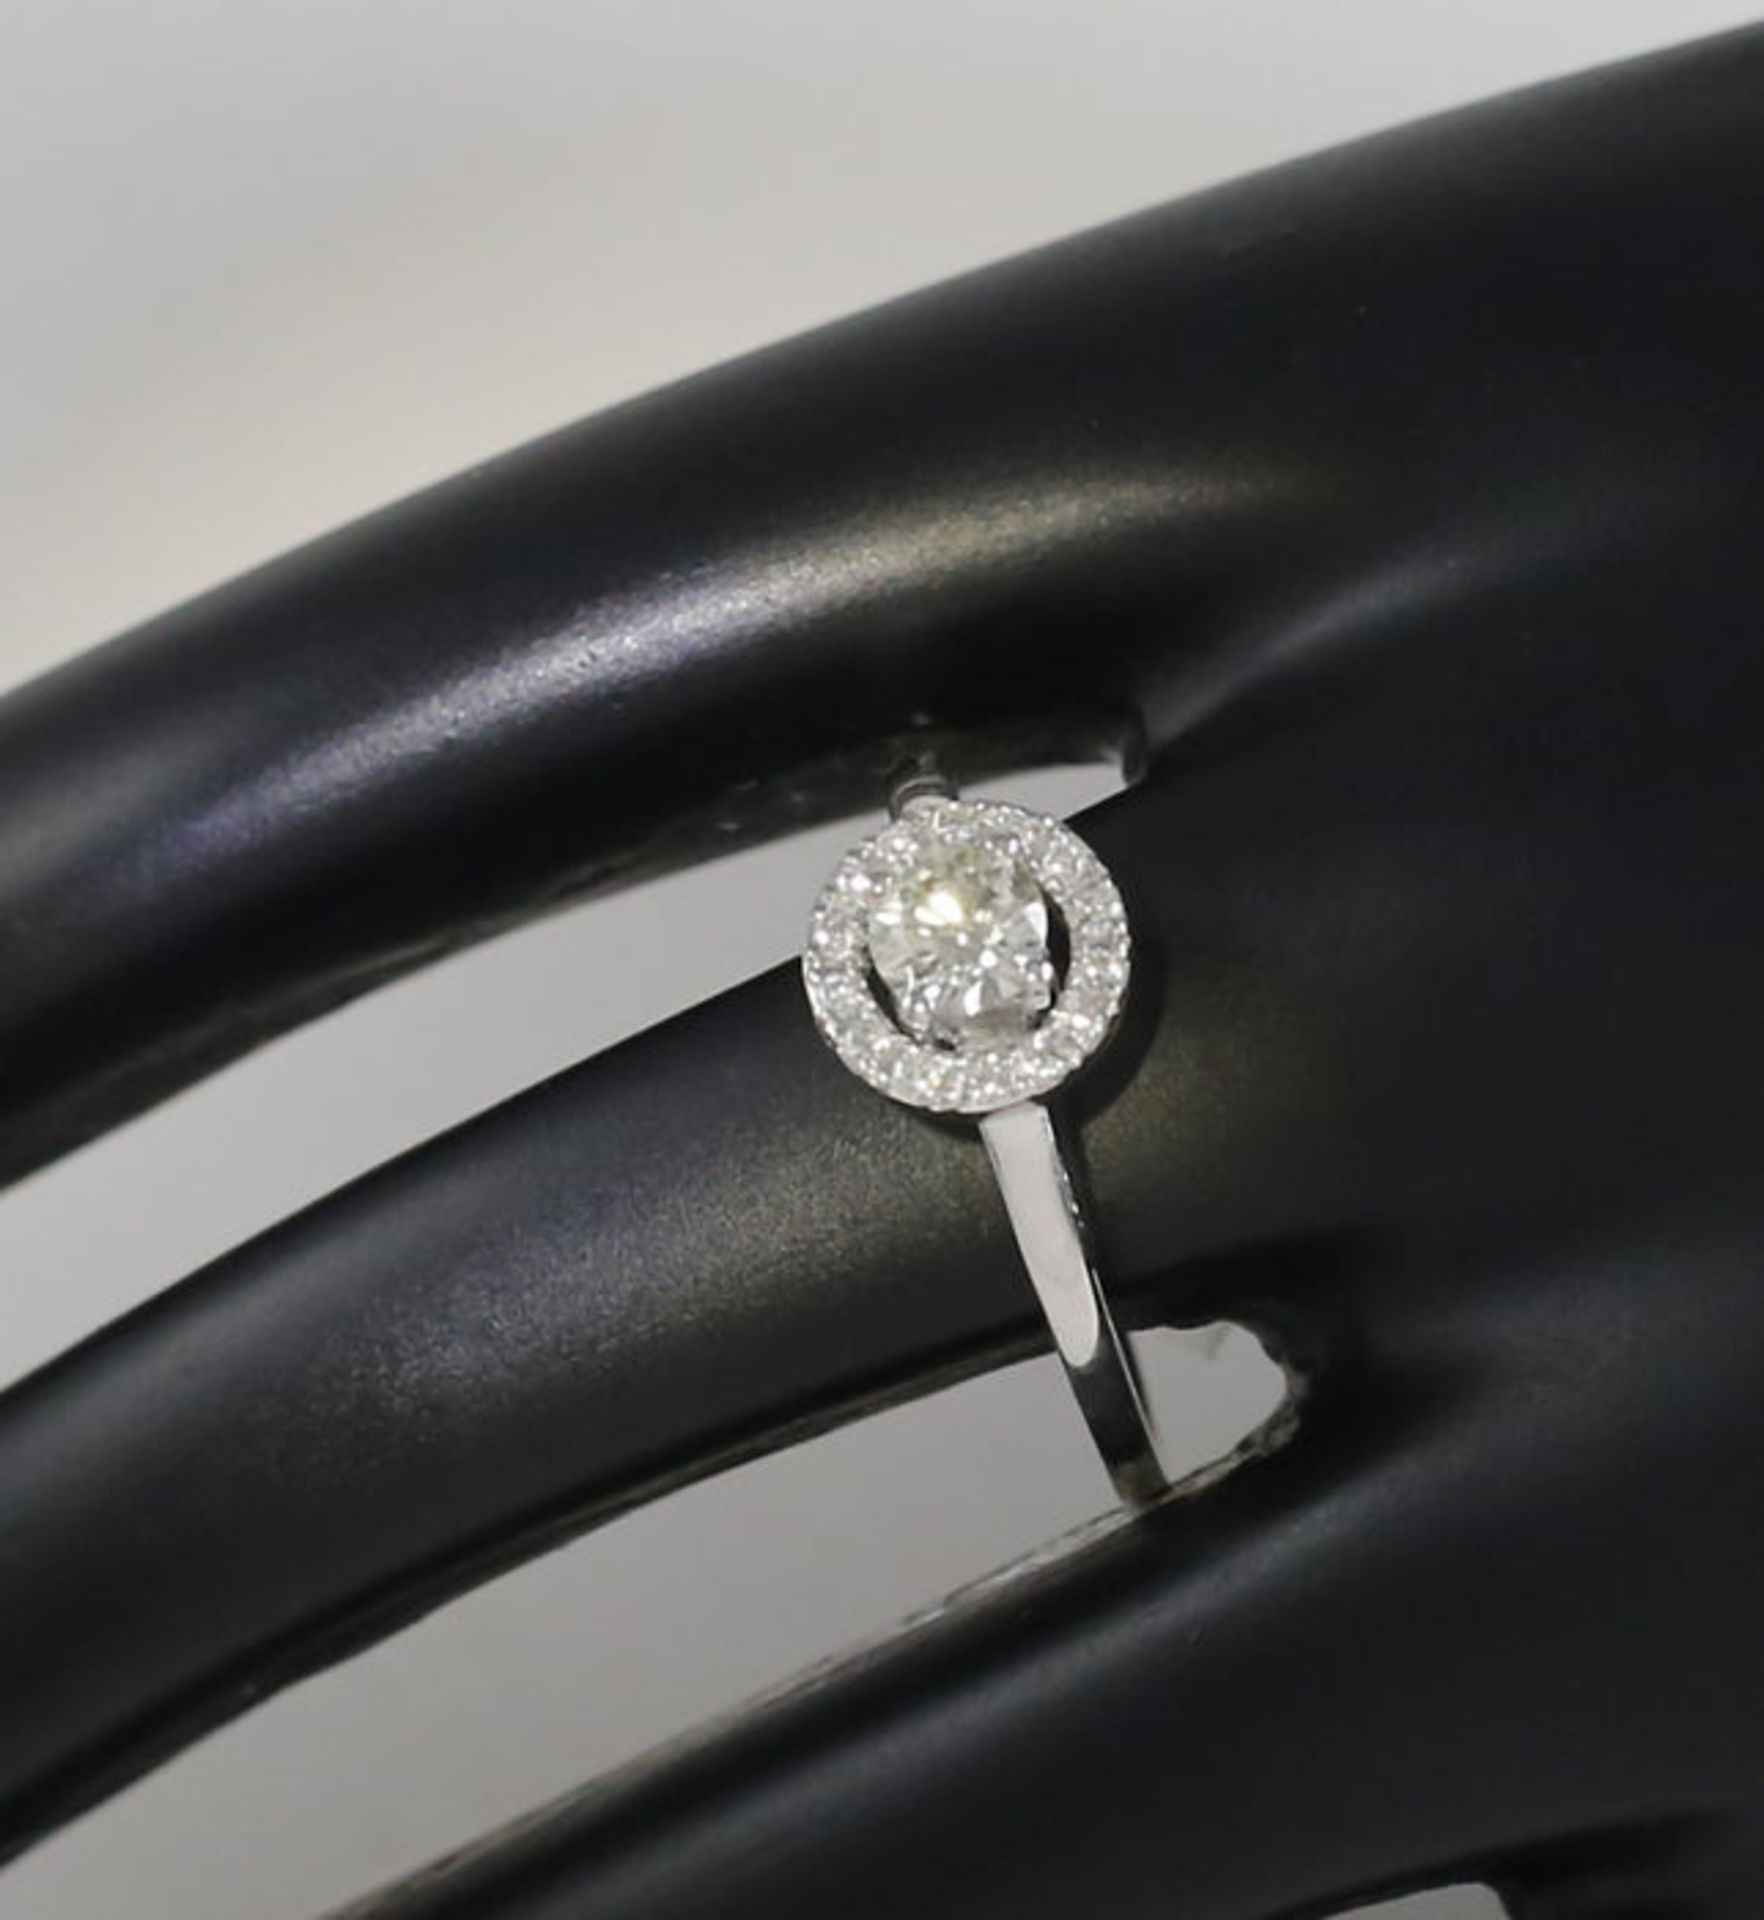 14 K / 585 White Gold Solitaire Diamond Ring - Image 4 of 7